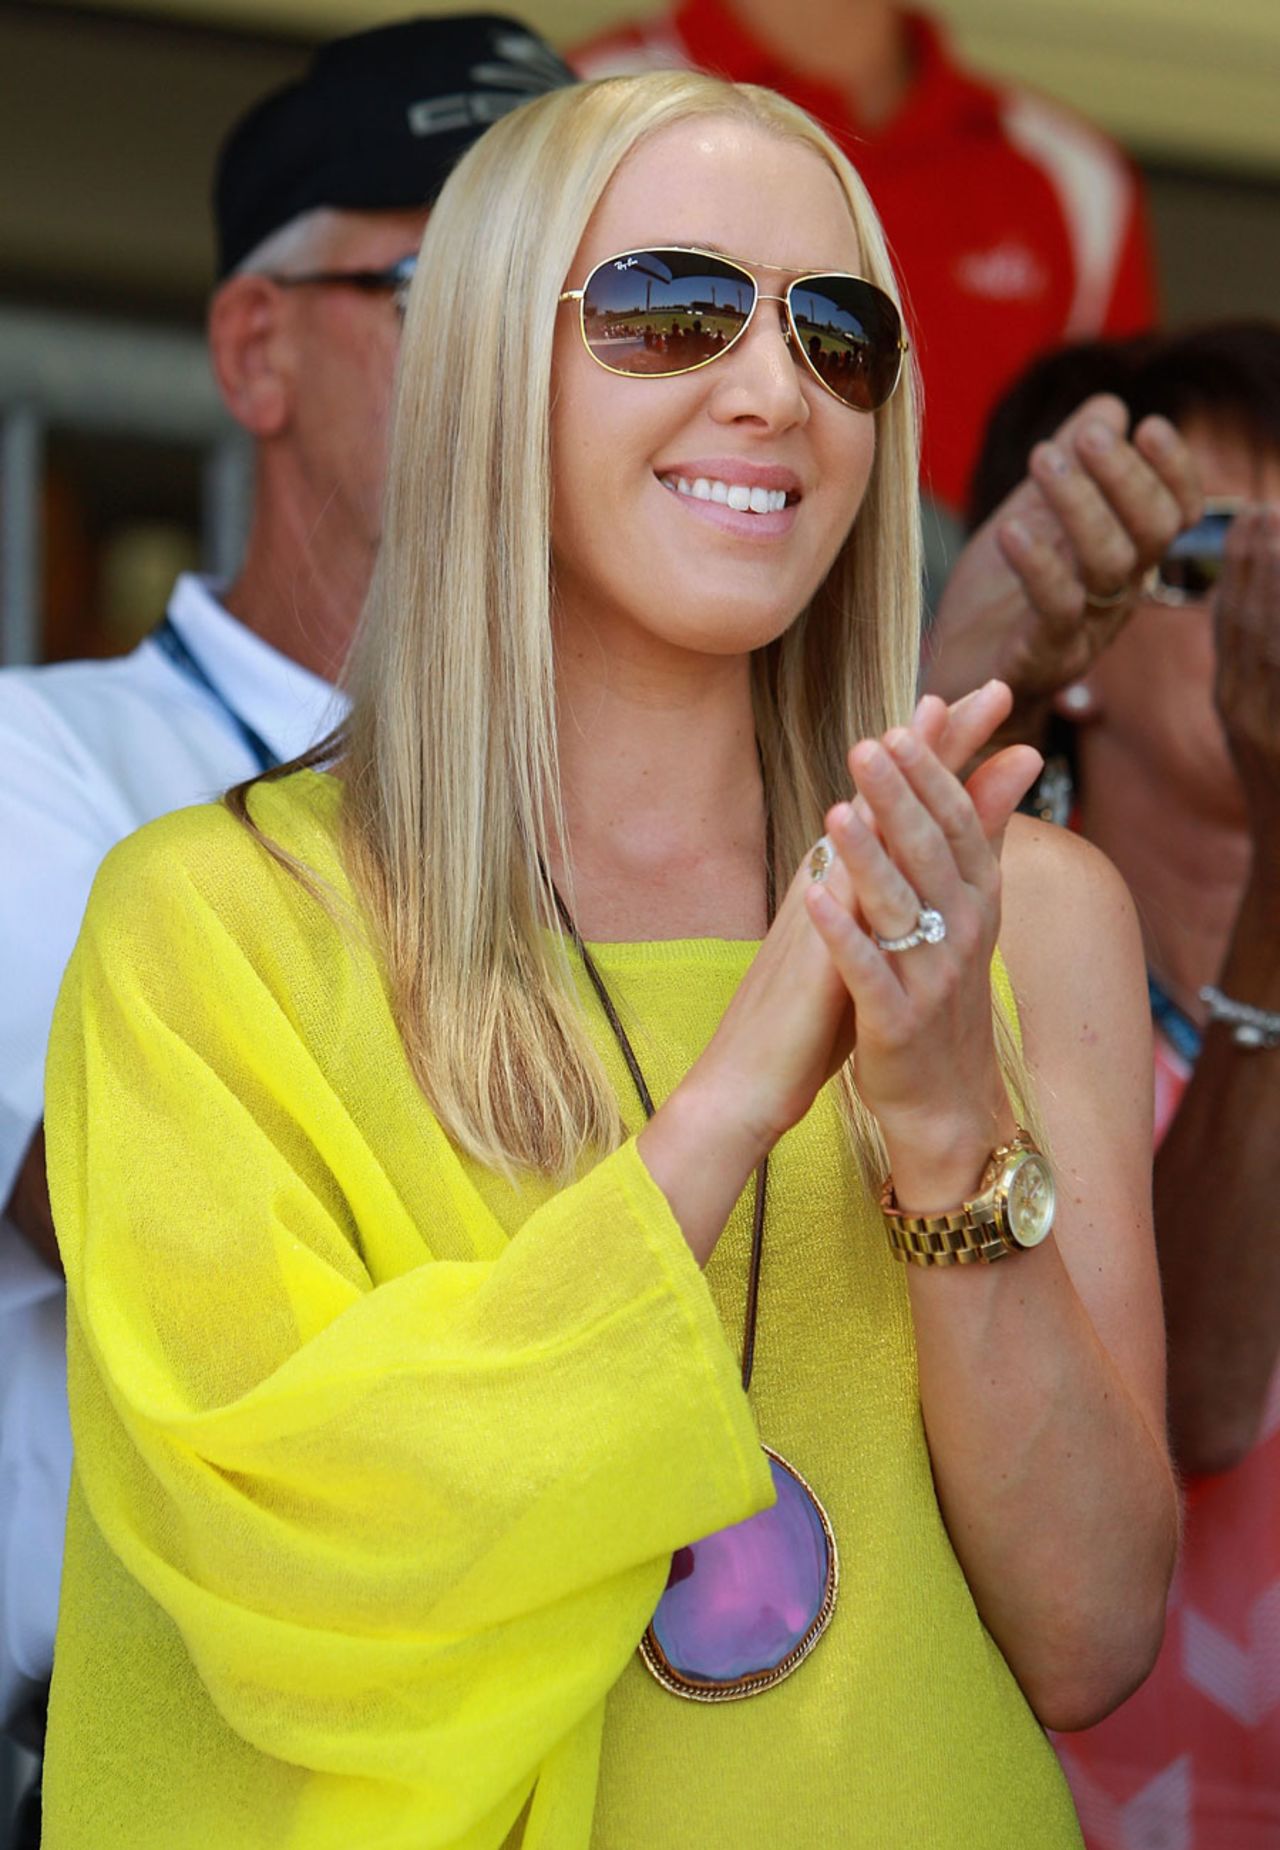 Rianna Ponting shows her support for Ricky Ponting, Australia v South Africa, 3rd Test, Perth, 4th day, December 3, 2012